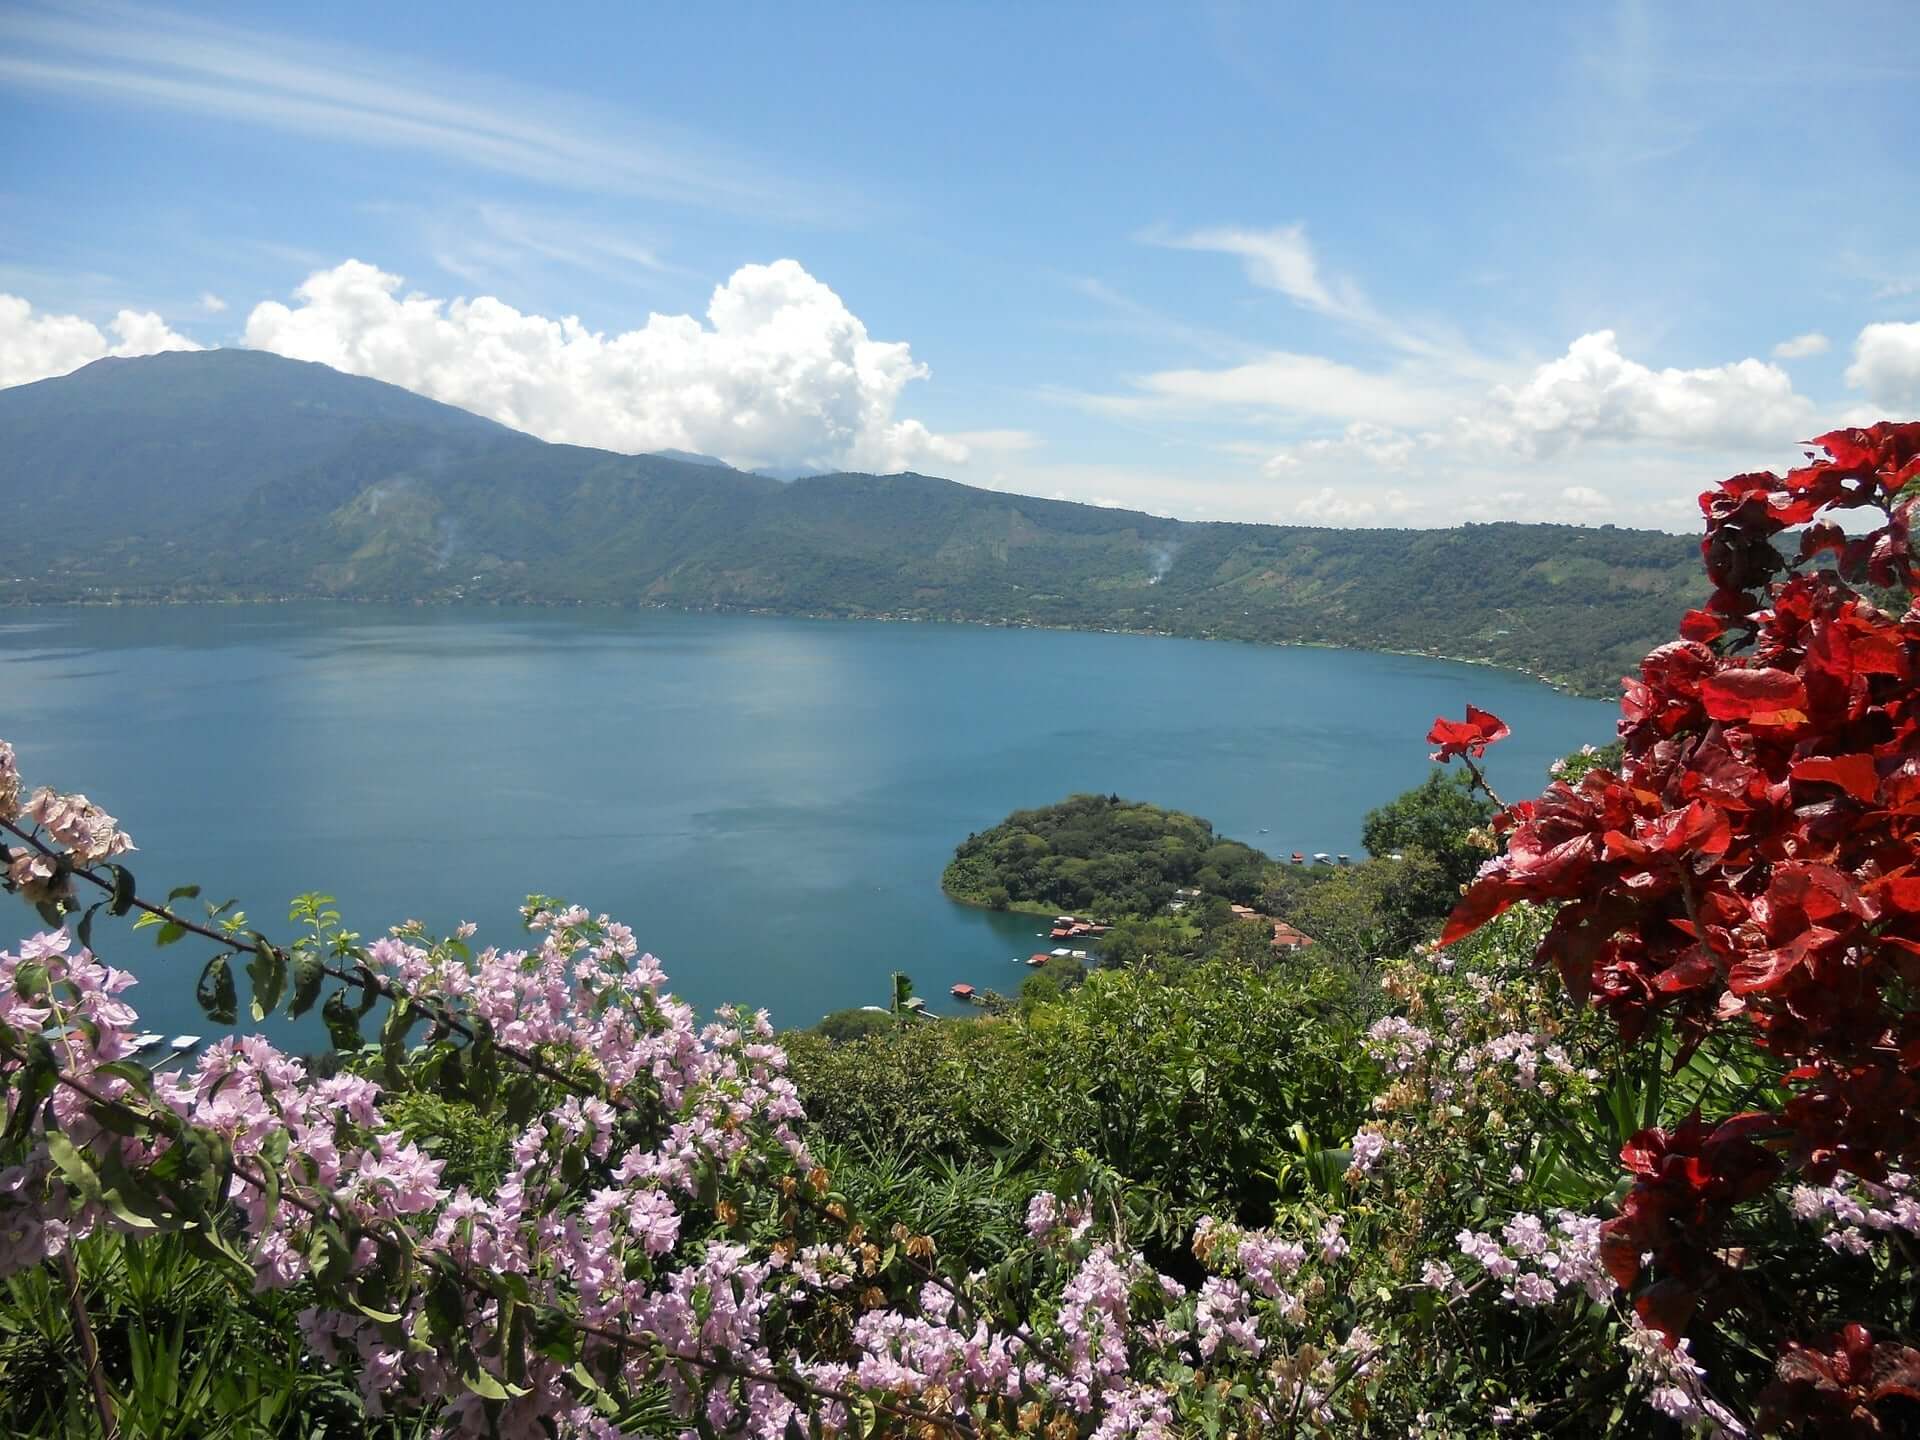 Landscape shot overlooking water and mountains of Democratic Republic of Congo